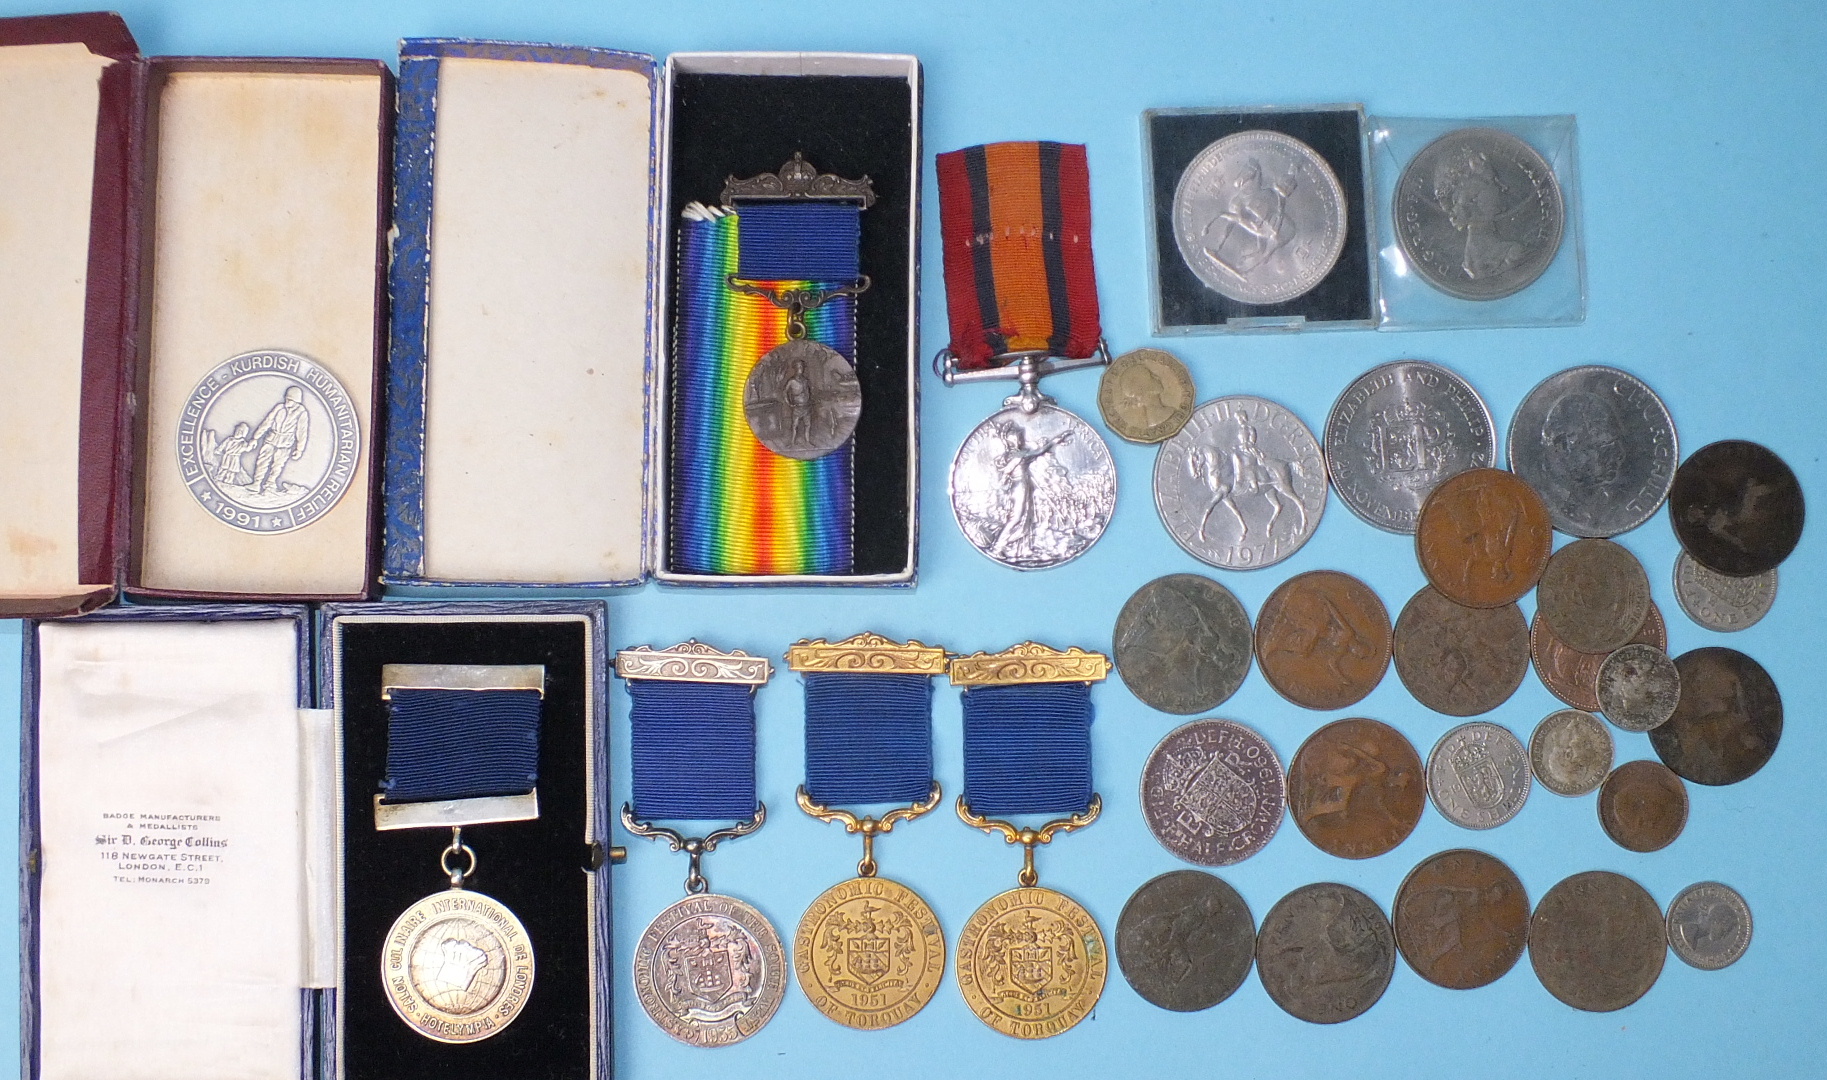 A Queens South Africa Medal to 5939 Corpl W Drinkwater W York Regt, (a/f), a Salon Culinaire